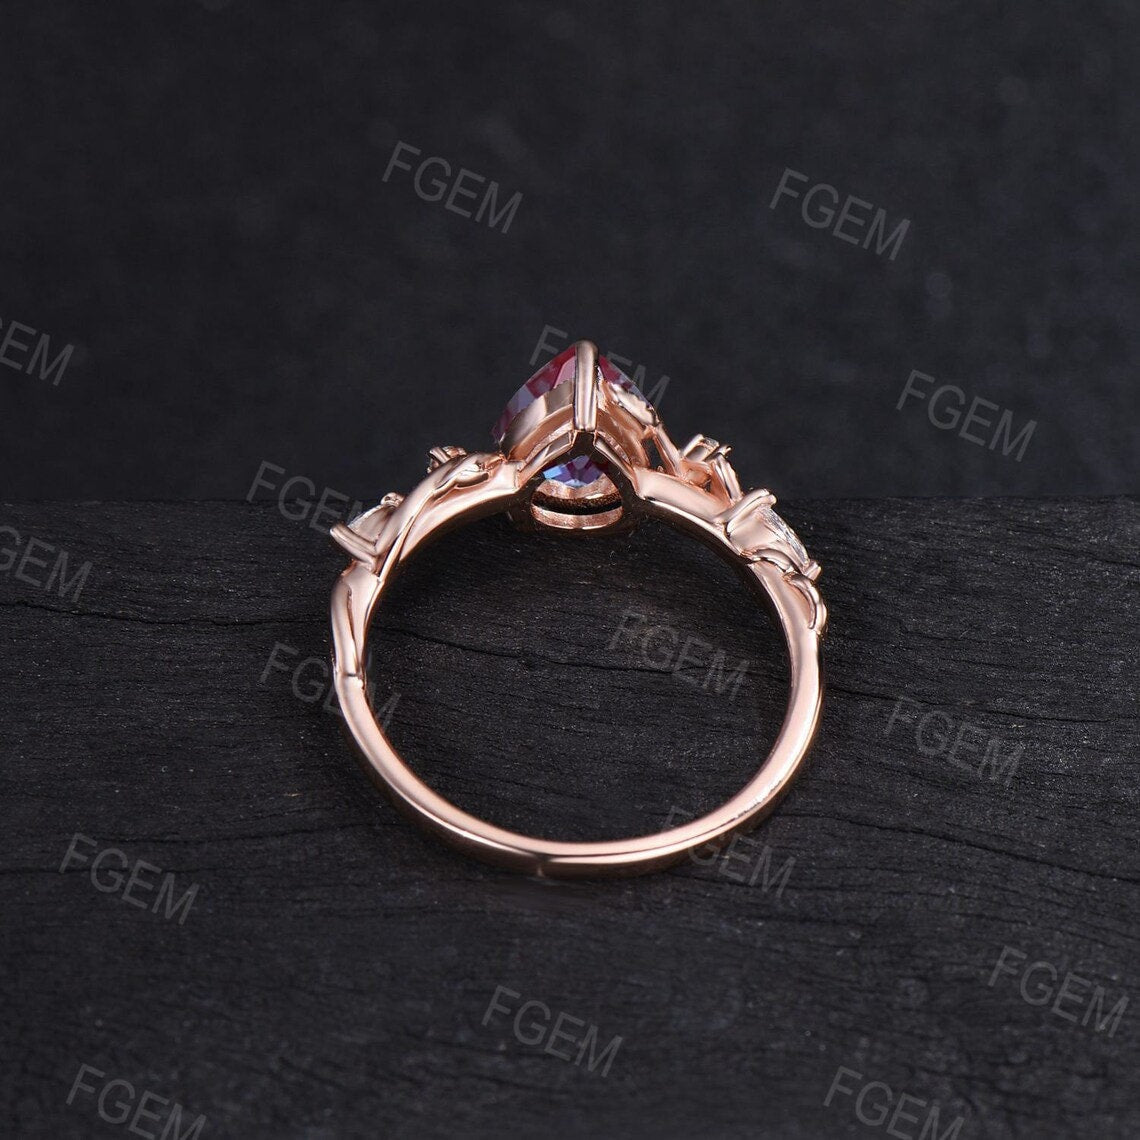 Unique Alexandrite Twist Leaf Ring 1.25ct Teardrop Alexandrite Engagement Rings Twig Vine Branch Nature Inspired Ring June Birthstone Gifts